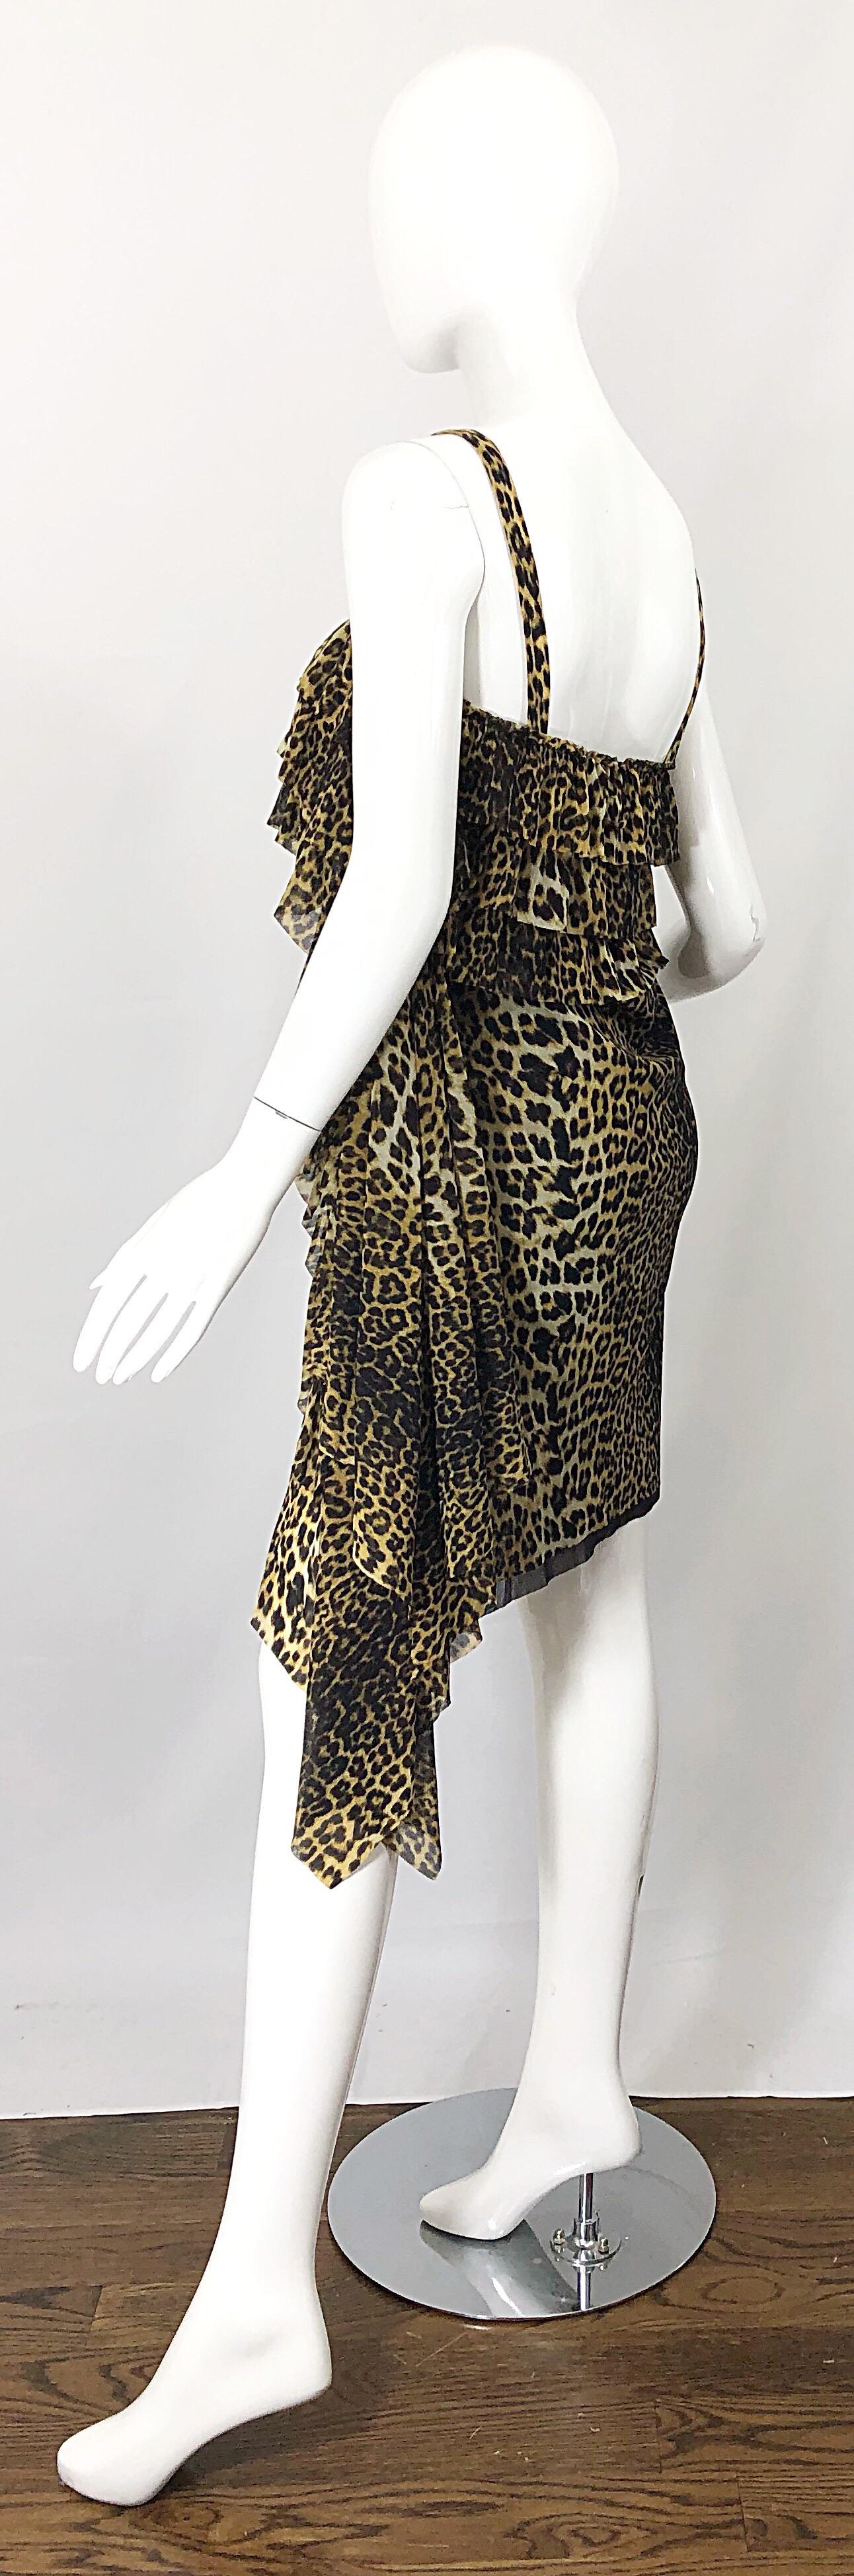 Vintage Jean Paul Gaultier 1990s Leopard Cheetah Animal Print 90s Sash Dress In Excellent Condition For Sale In San Diego, CA